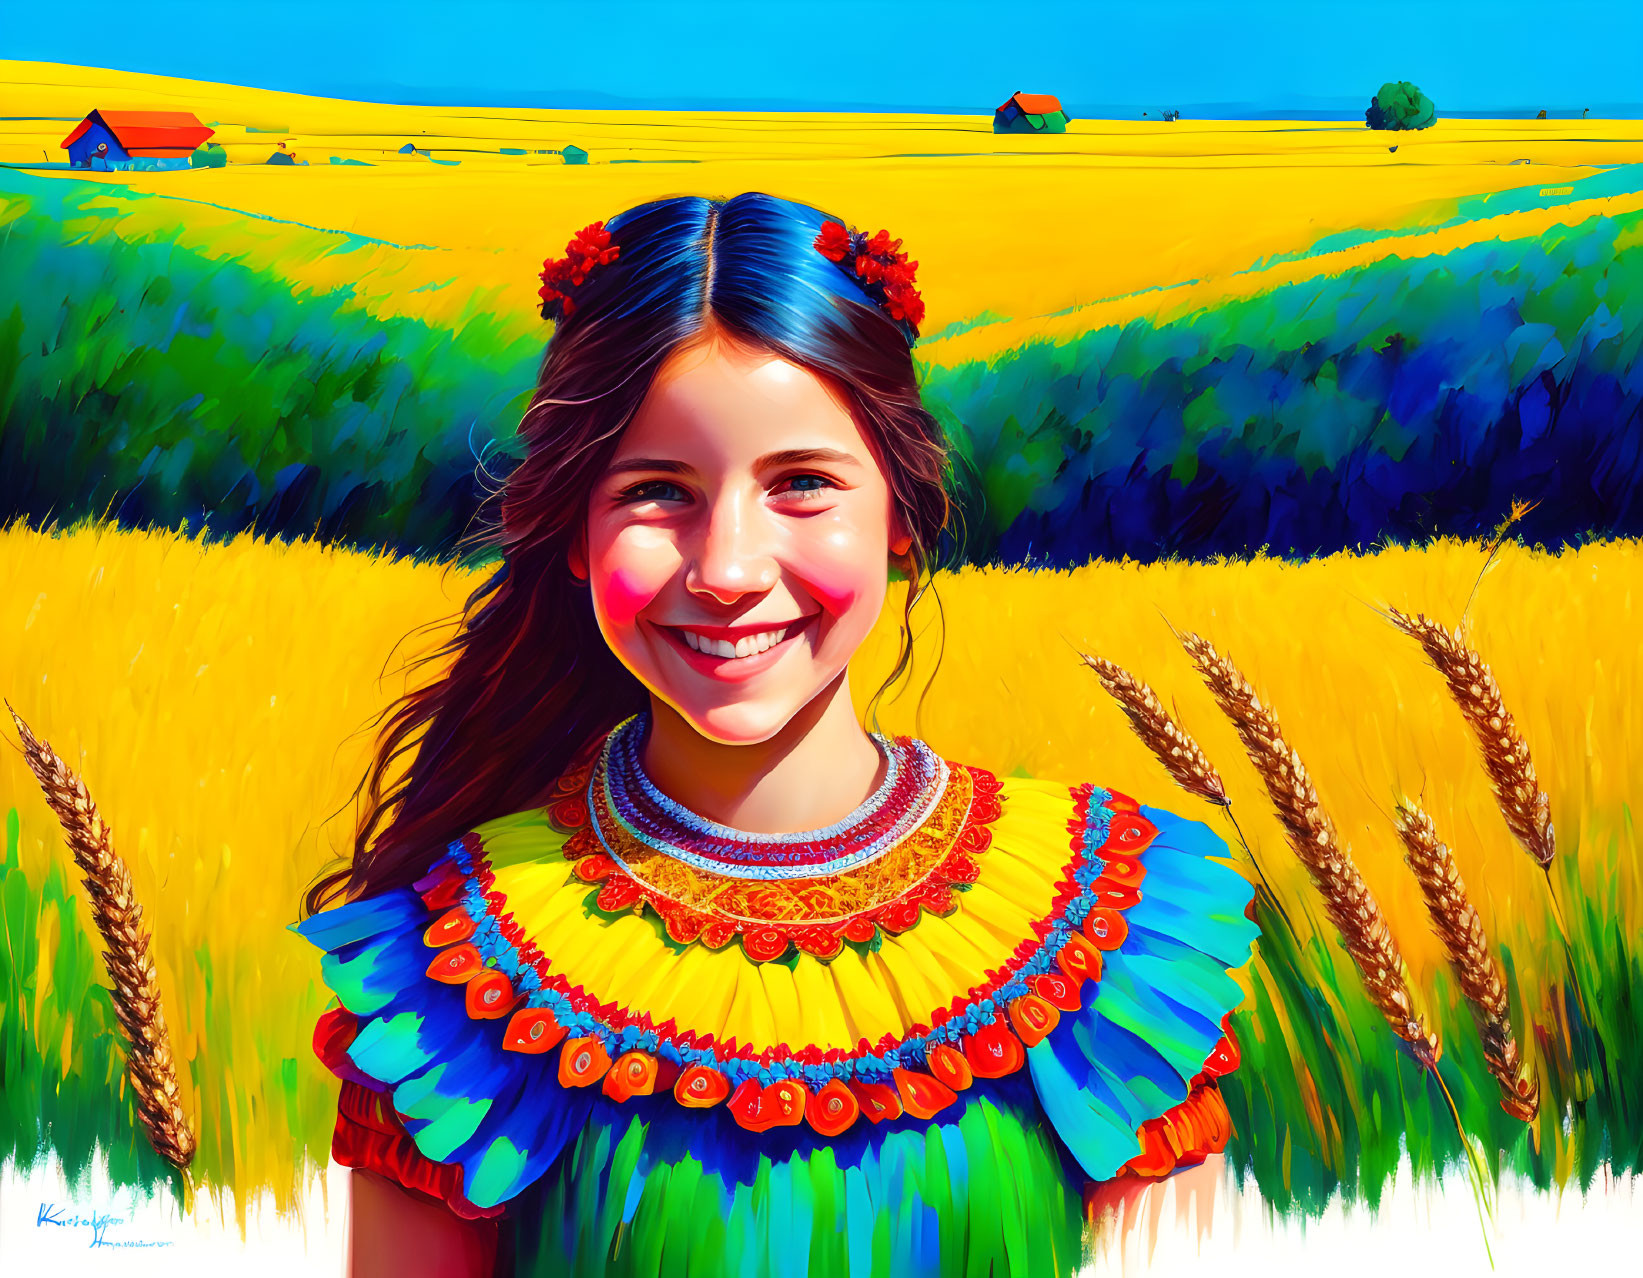 A smiling girl in a traditional Ukrainian outfit s